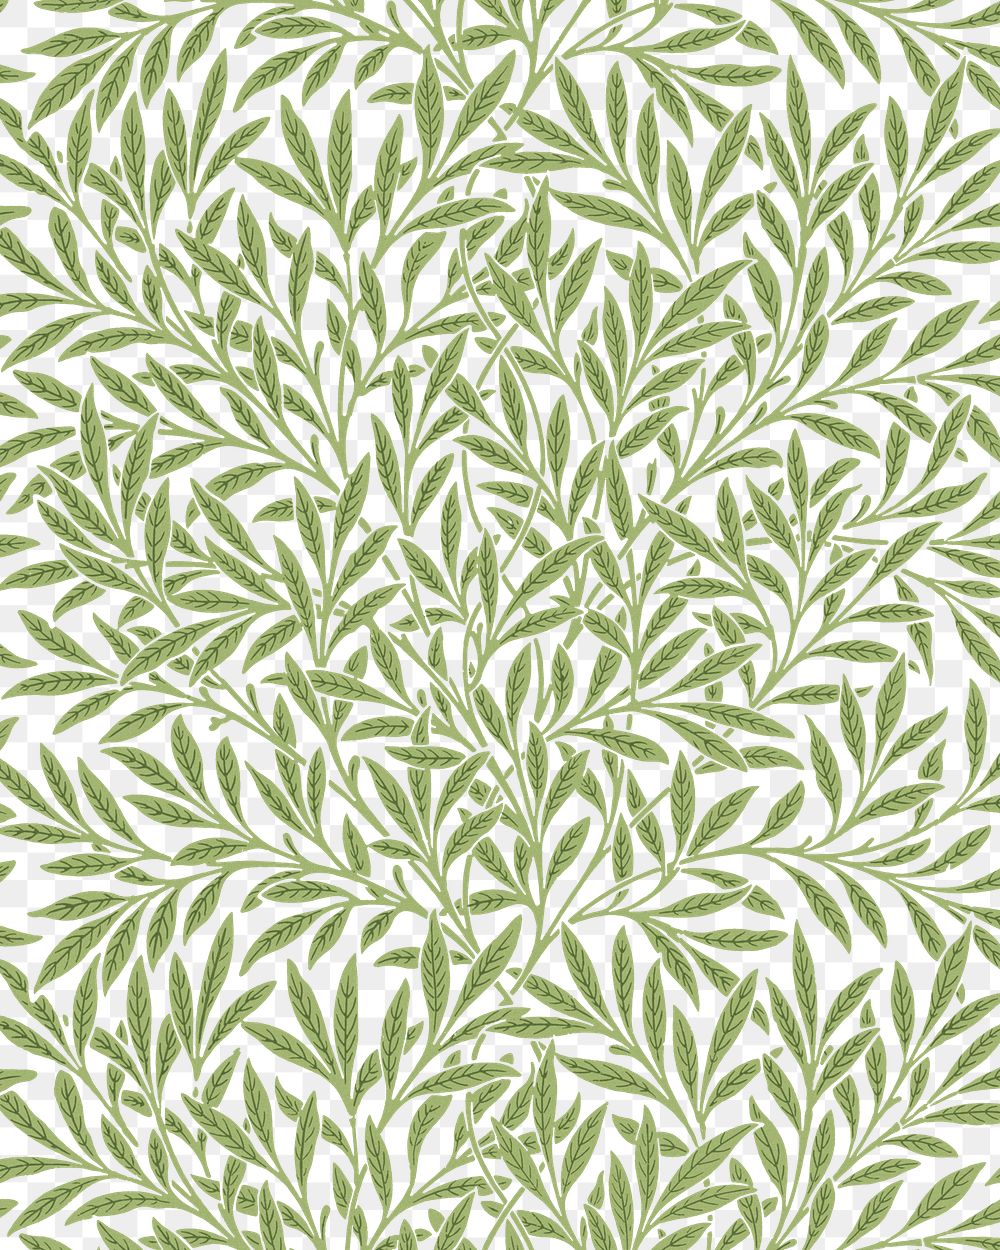 William Morris's png vintage pattern, green willow illustration, remix from the original artwork